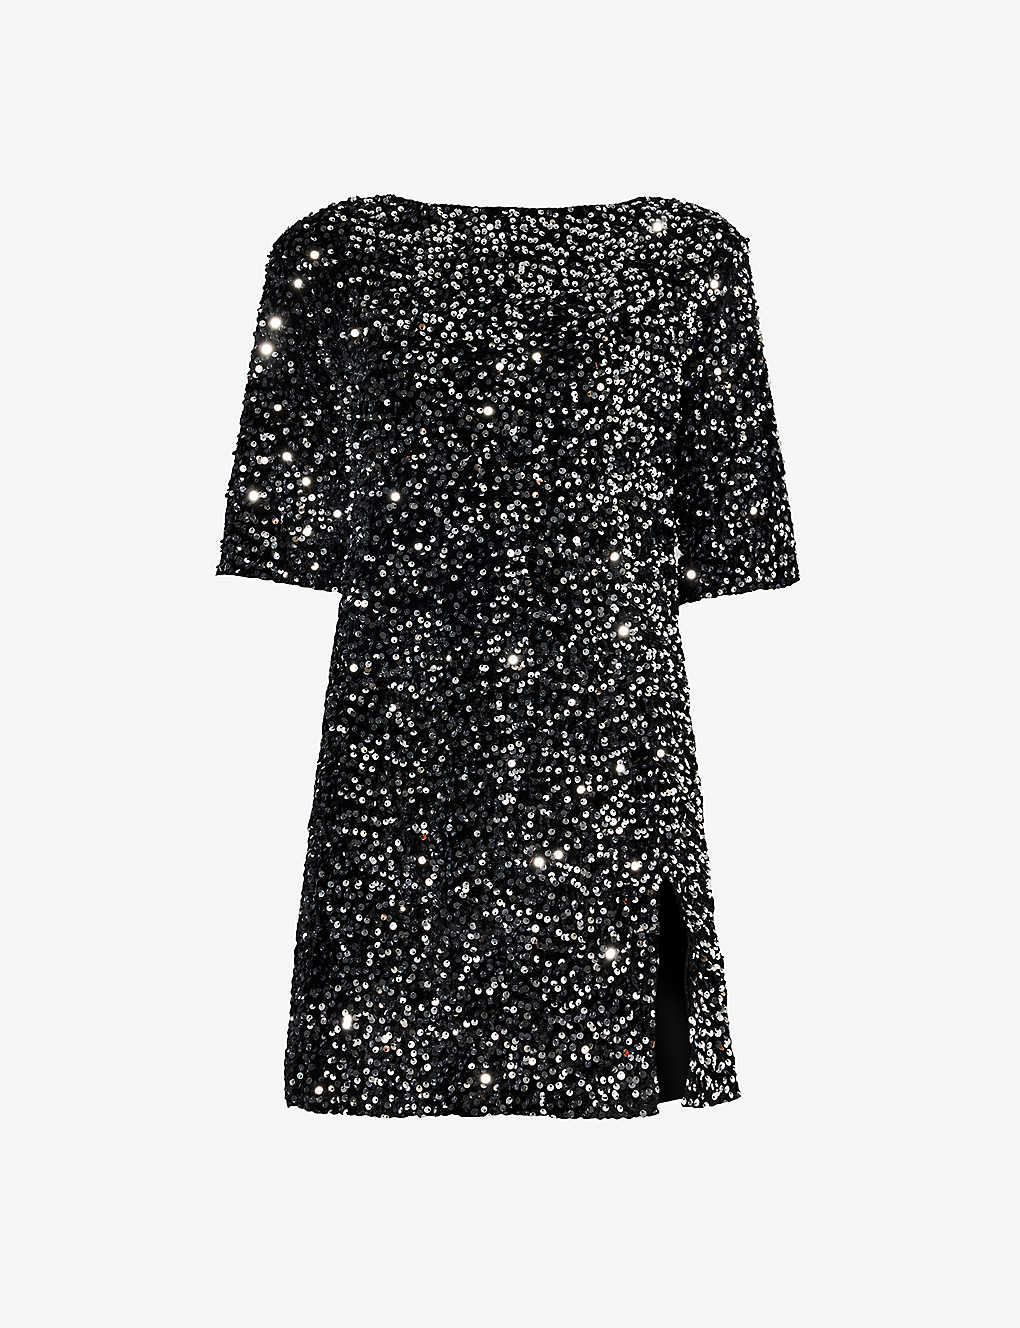 4TH & RECKLESS 4TH & RECKLESS WOMEN'S BLACK MARCA SEQUIN-EMBELLISHED WOVEN MINI DRESS